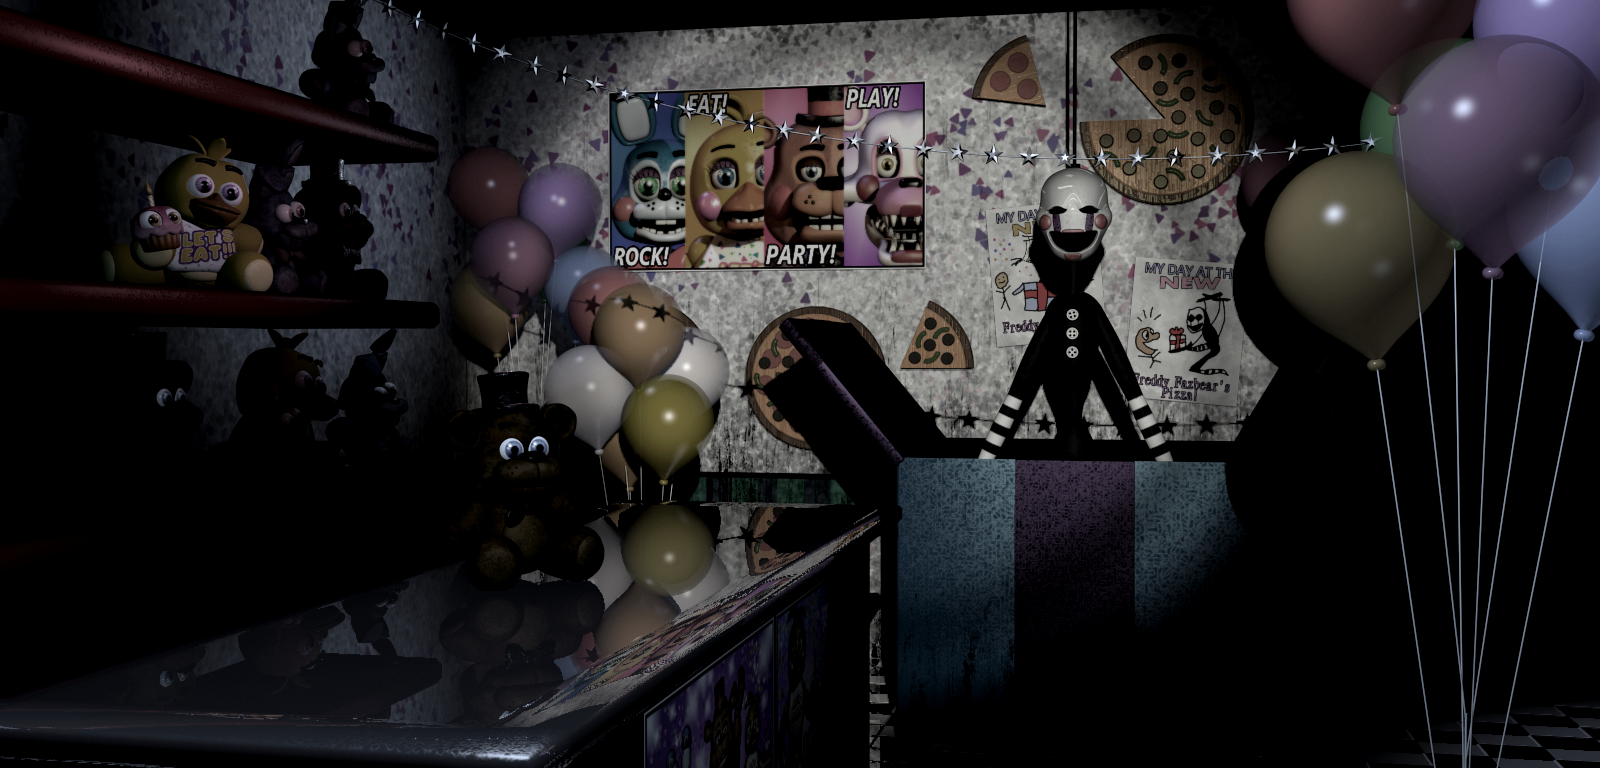 FNAF 1 map  Fnaf, Wanted template, Five nights at freddy's